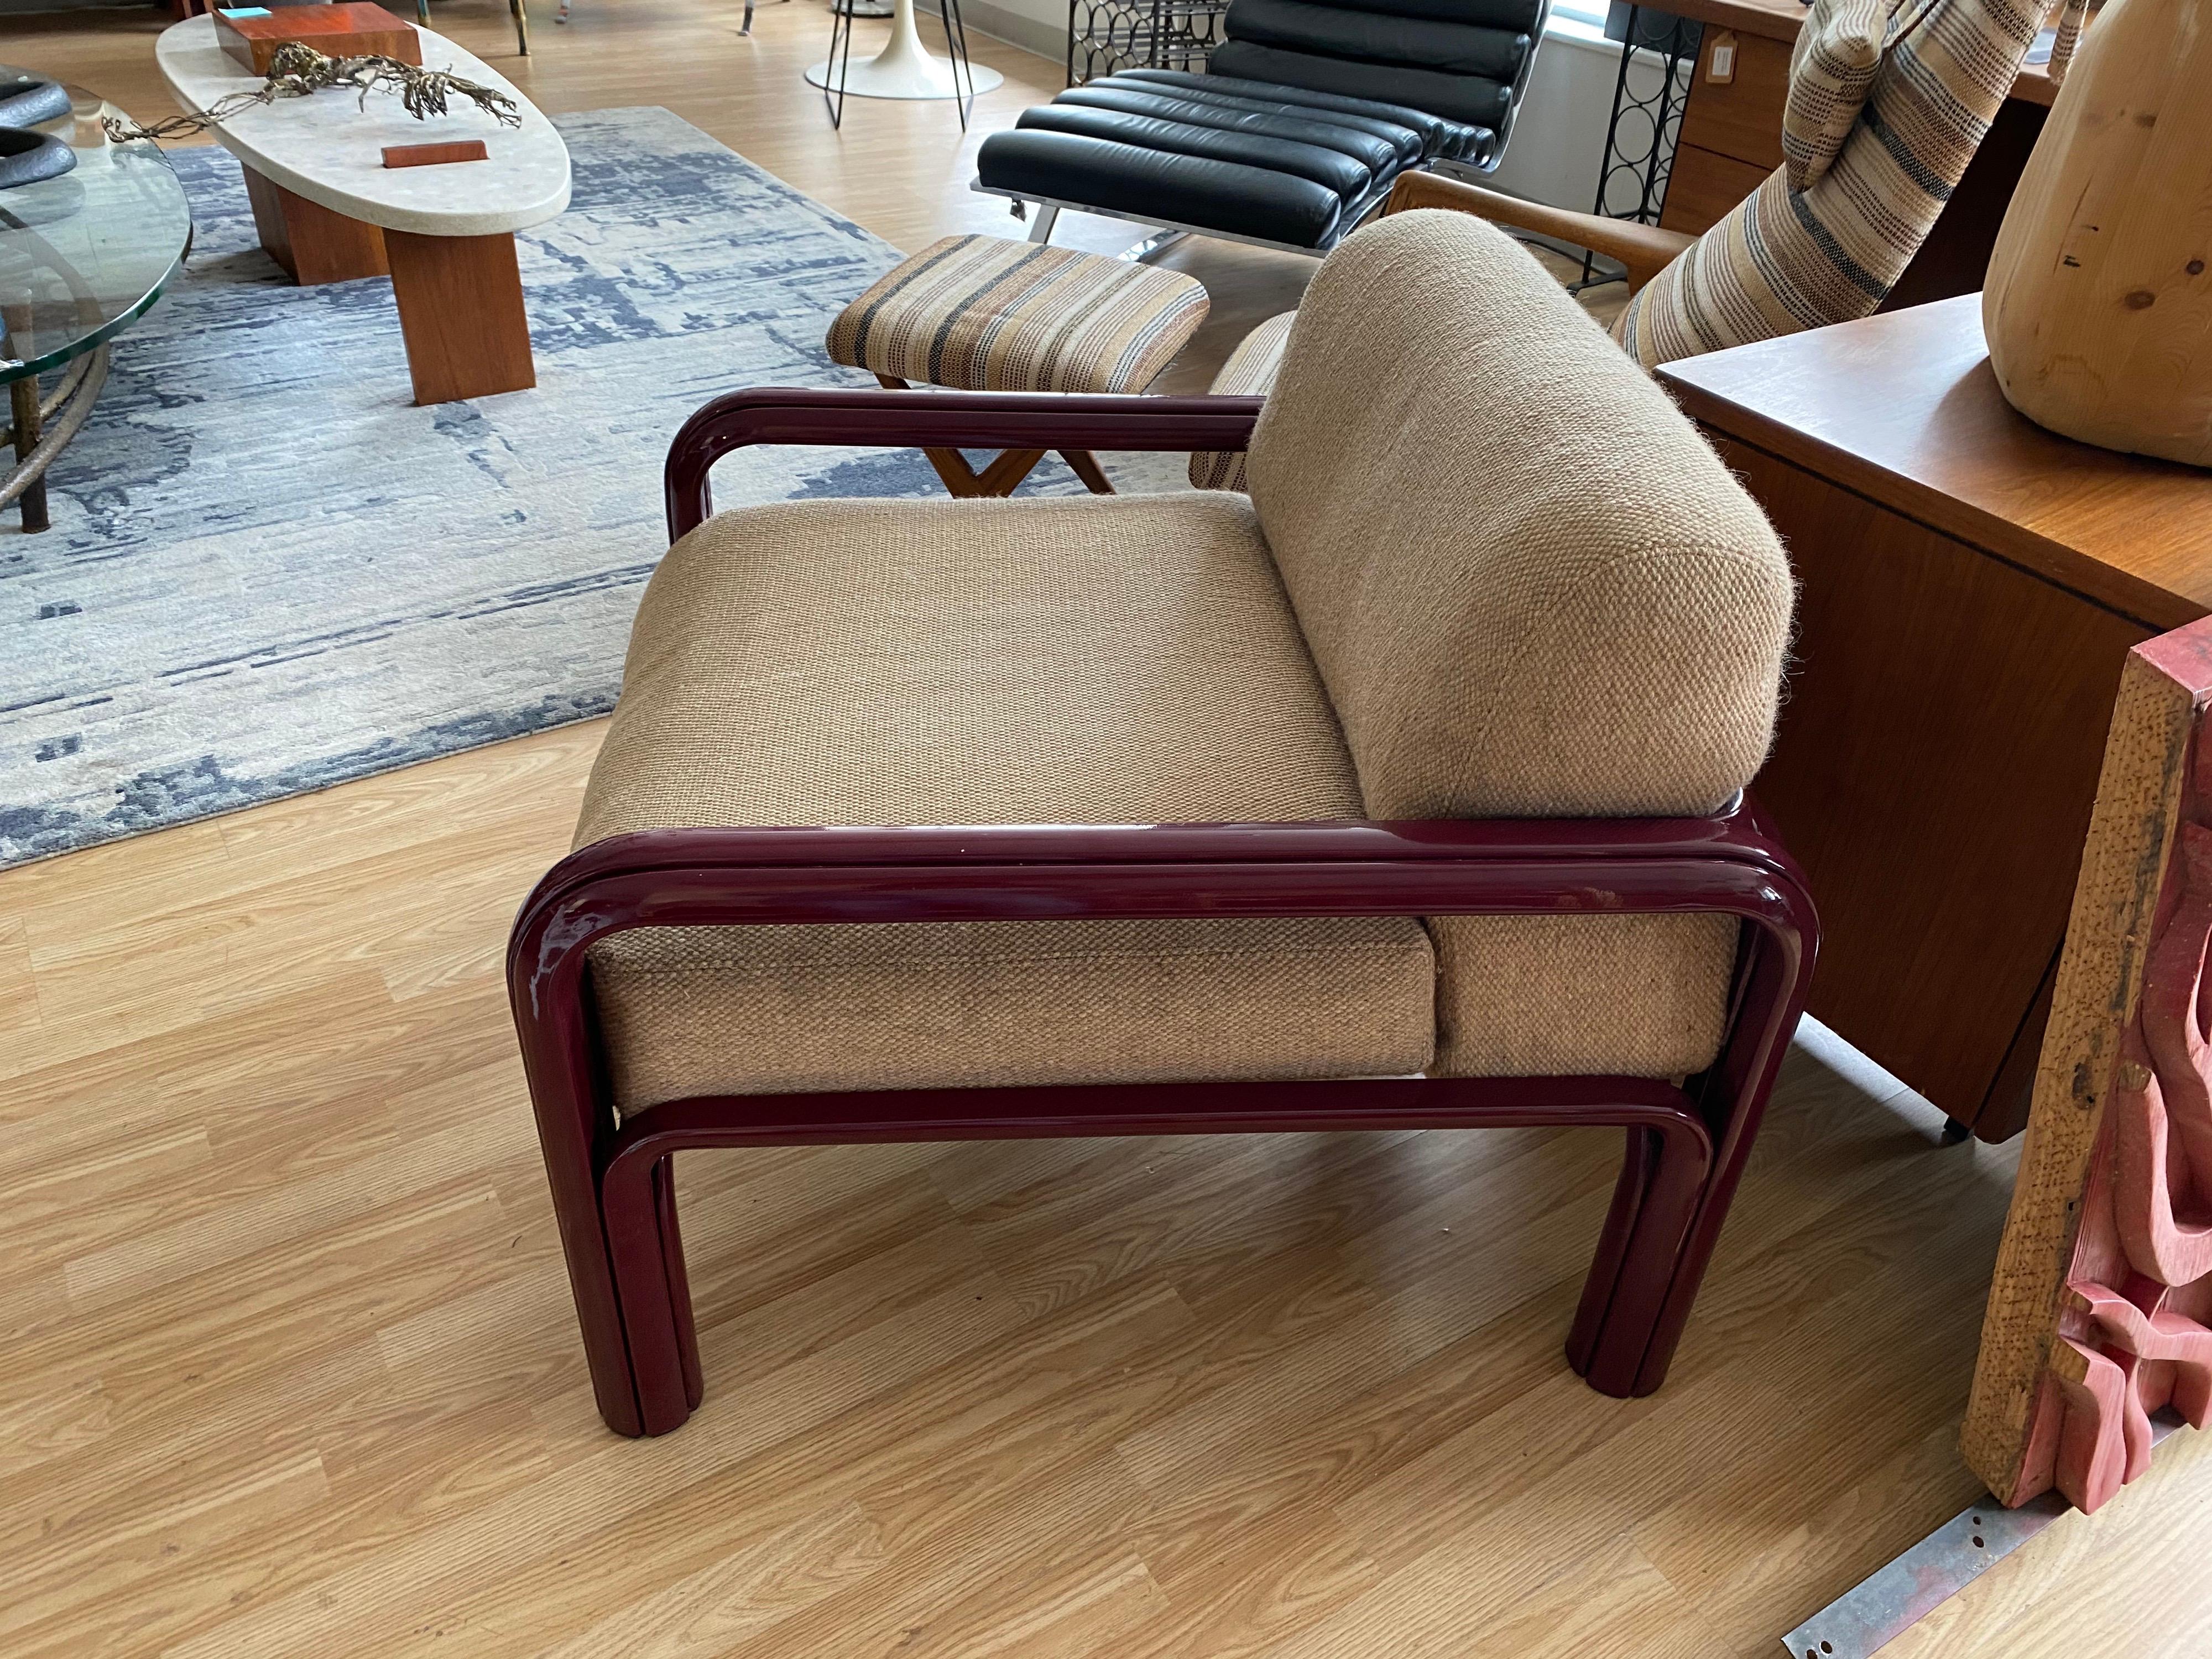 Stunning mid-century lounge chair designed by Italian architect and designer Gae Aulenti for Knoll is solid, low-slung with rounded enameled frame, this lounge chair offers comfortable seating as well as a sculptural presence.